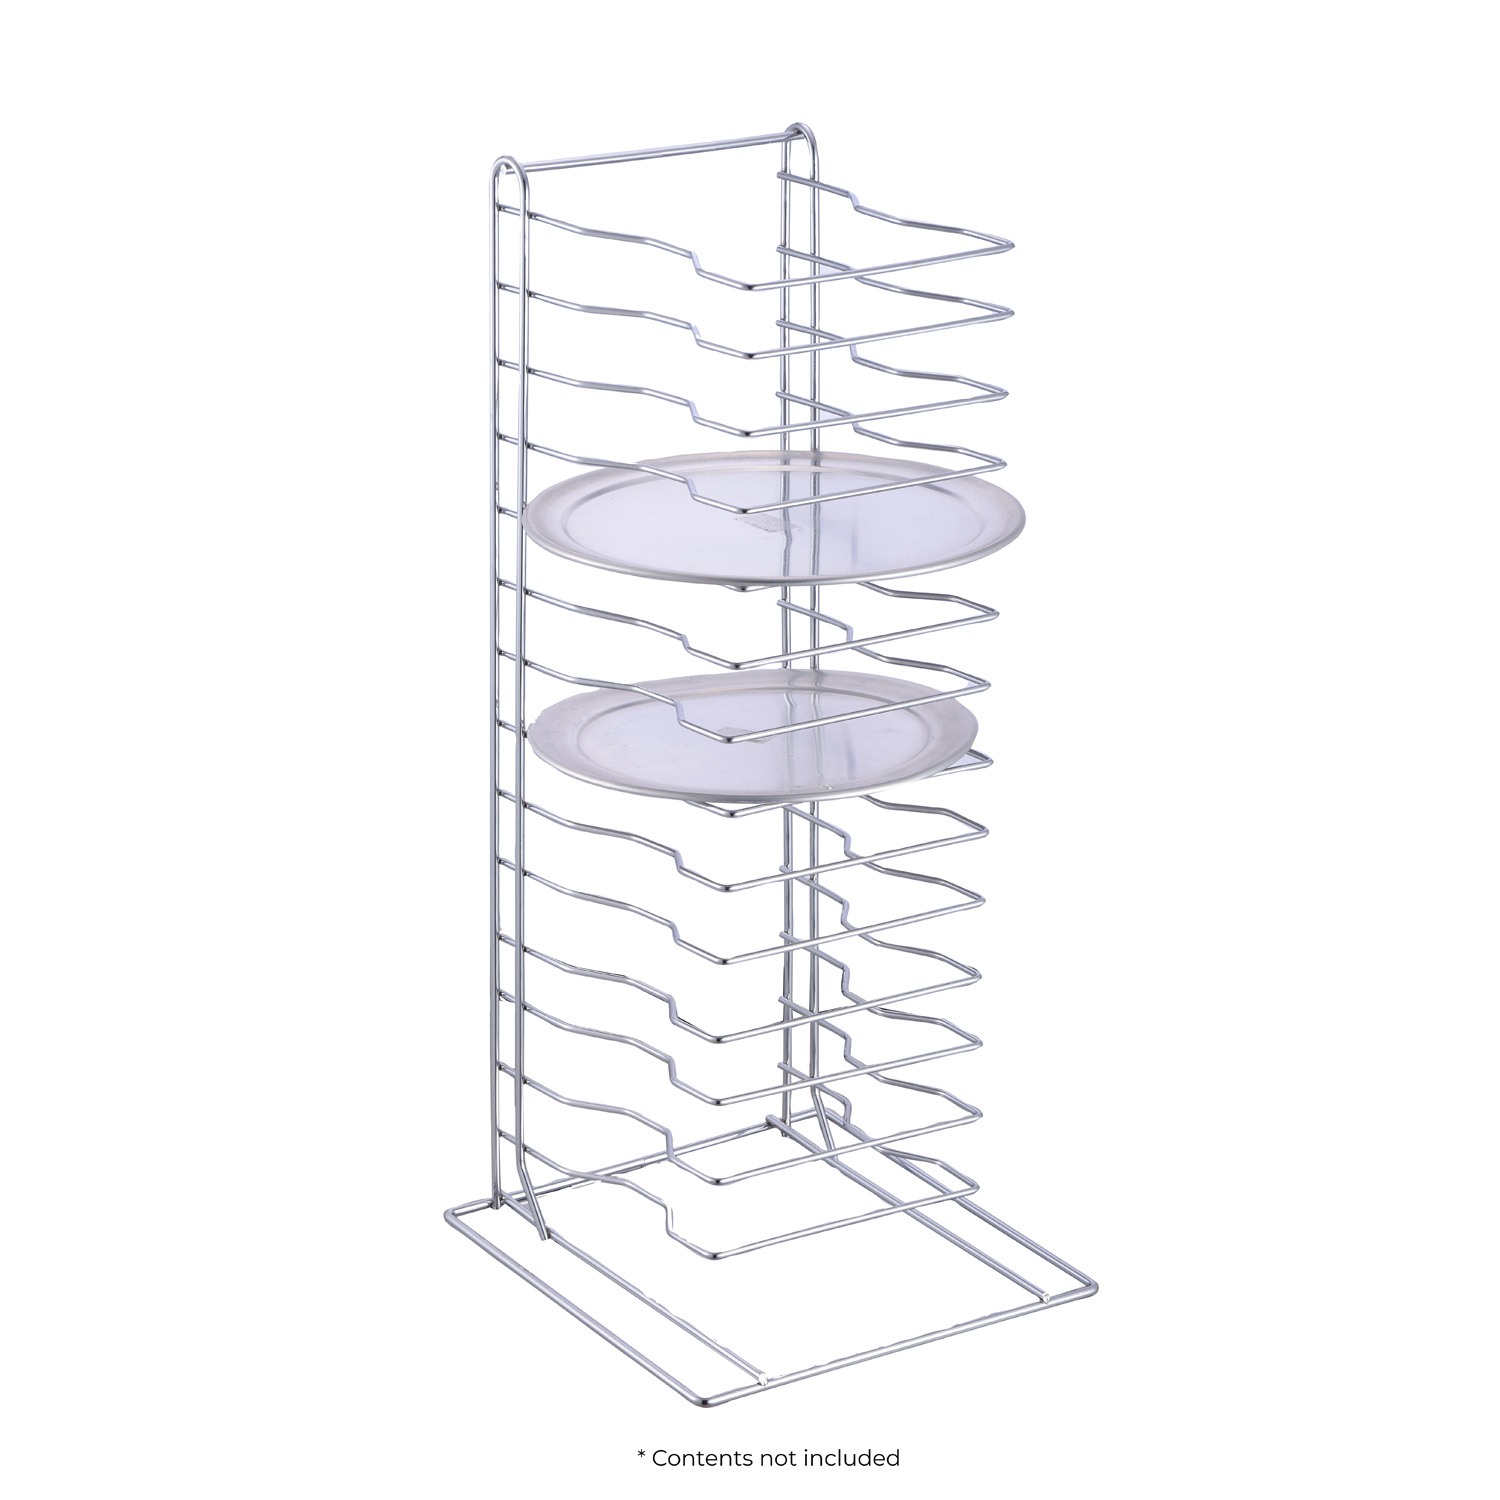 CAC China APZR-15 Chrome-Plated Pizza Pan Rack 15-Tier